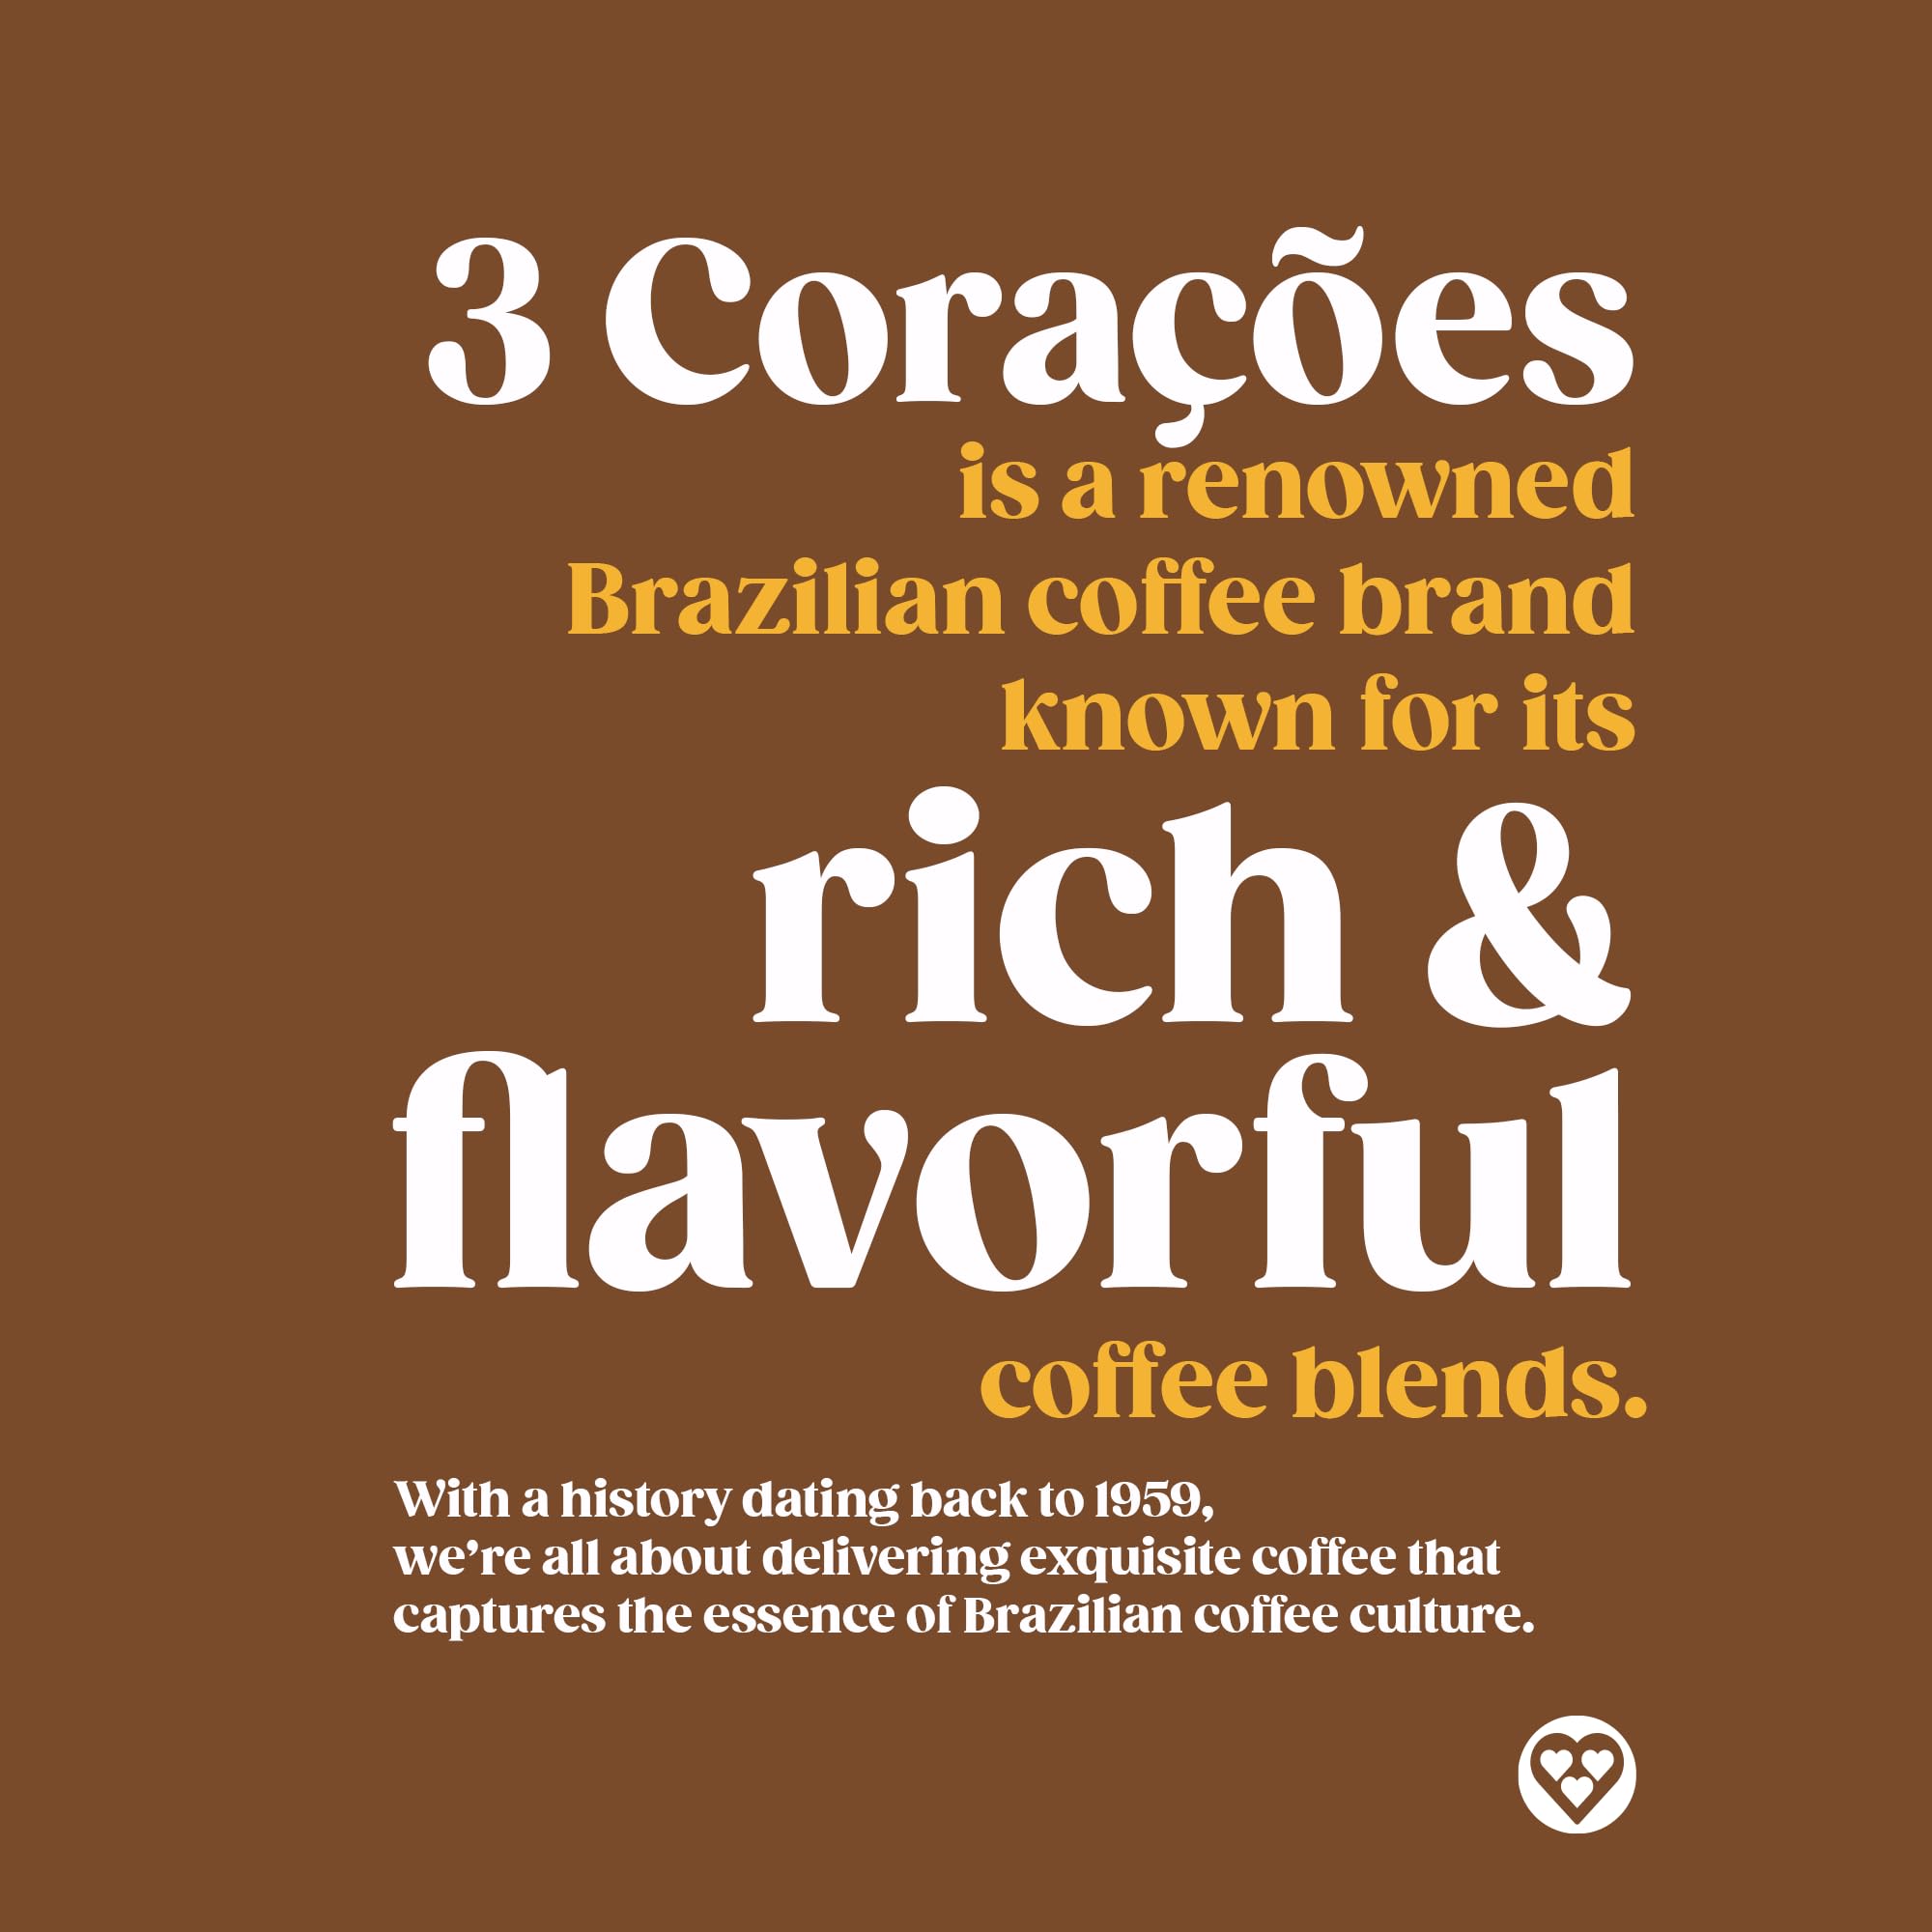 3 Coracoes Extra Forte Brazilian Ground Coffee - 17.6 ounces - Vacuum Sealed Pack of 4 - Fine Ground Coffee Dark Roast - Naturally Processed for Unique Flavor, Aroma, and Full Body Texture…